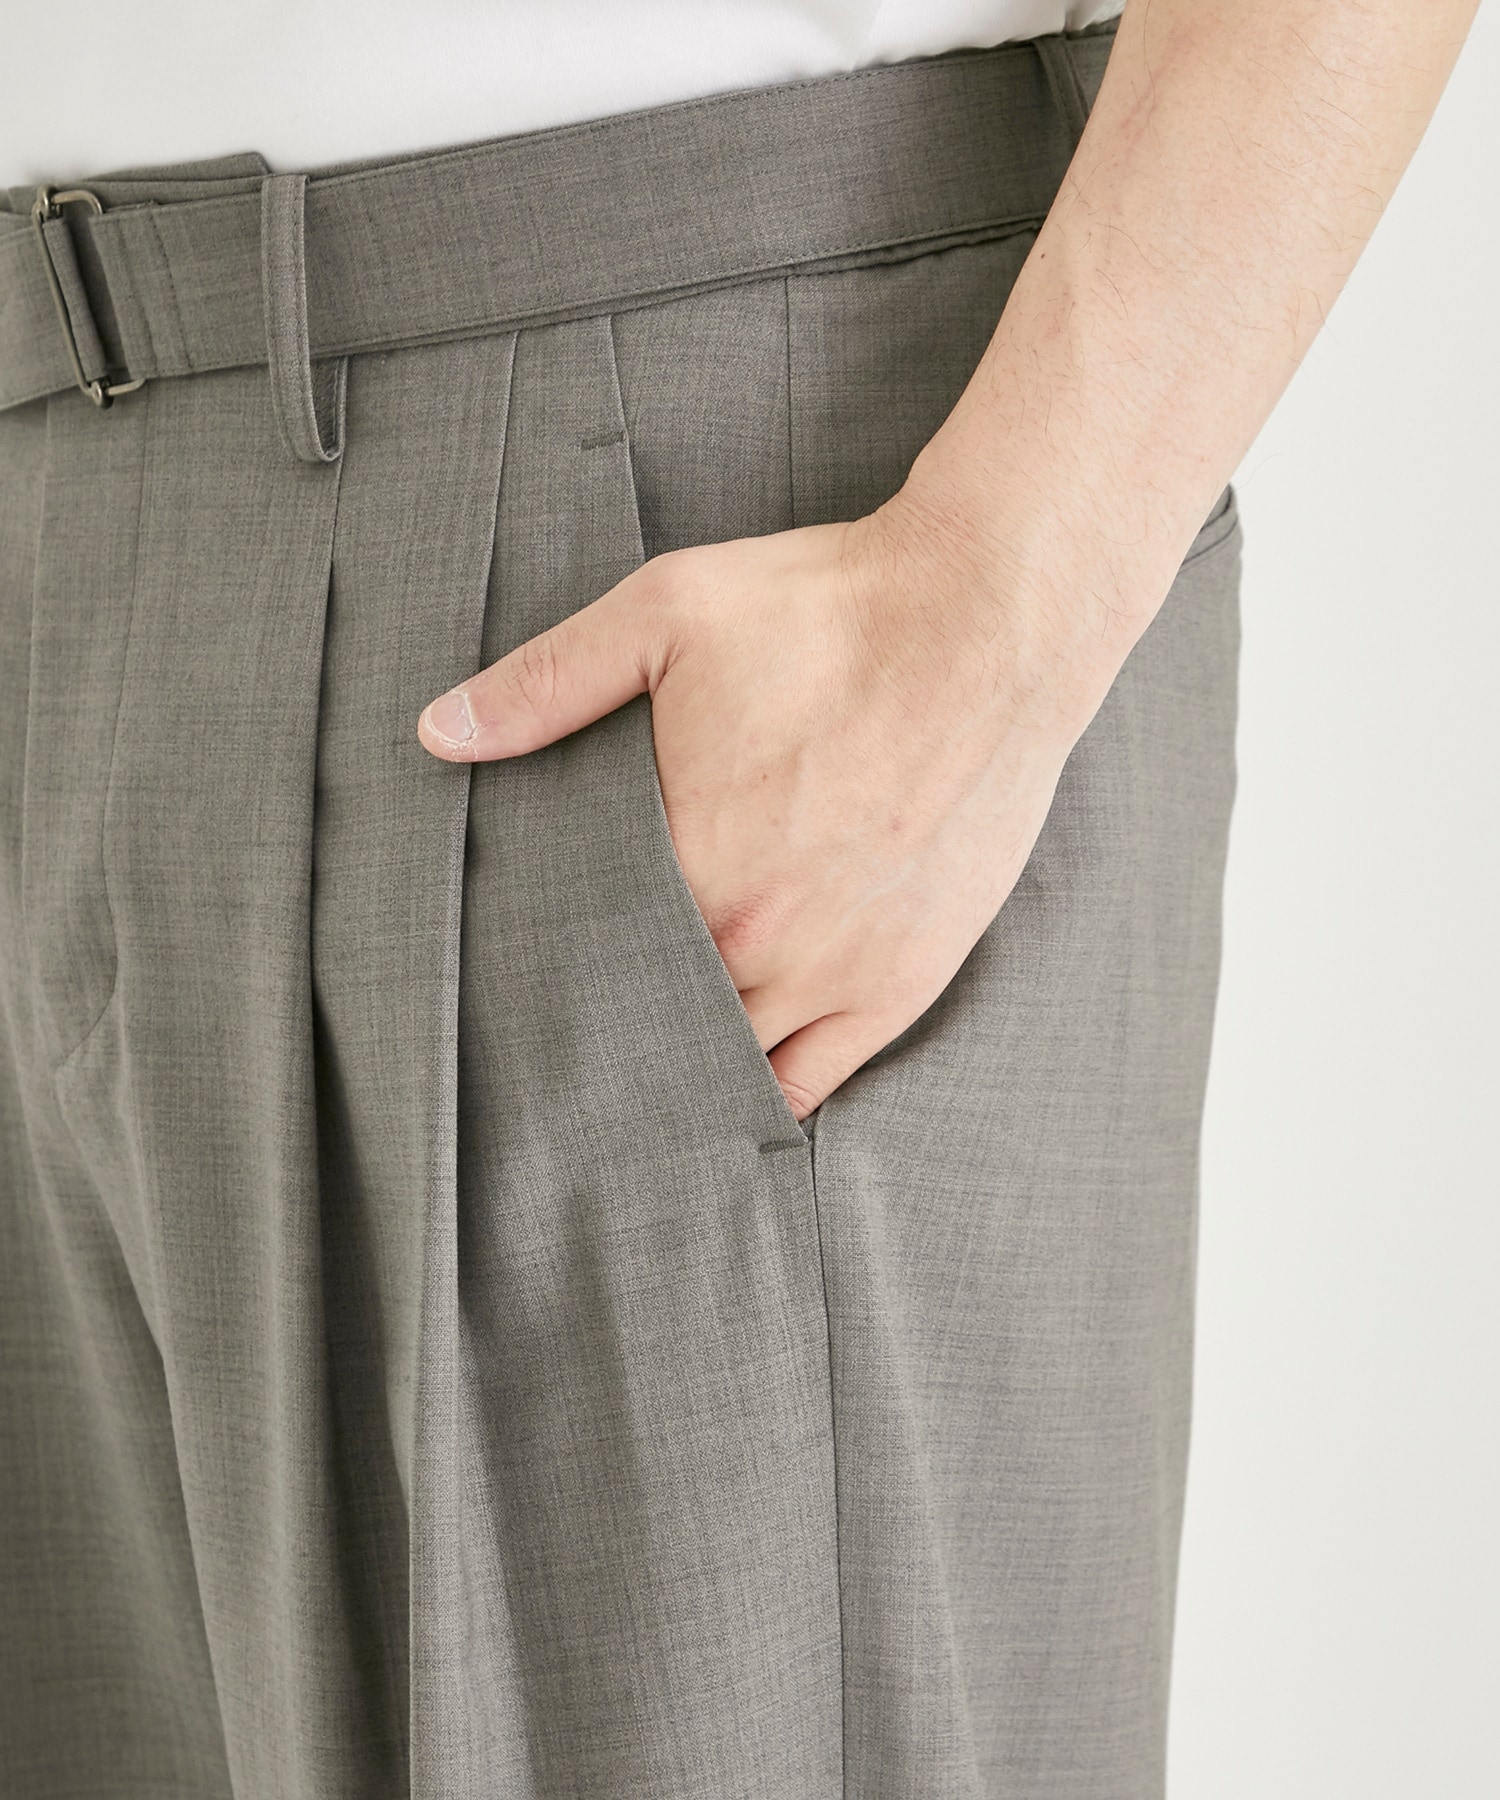 EX.TROPICAL BELTED WIDE PANTS ATTACHMENT